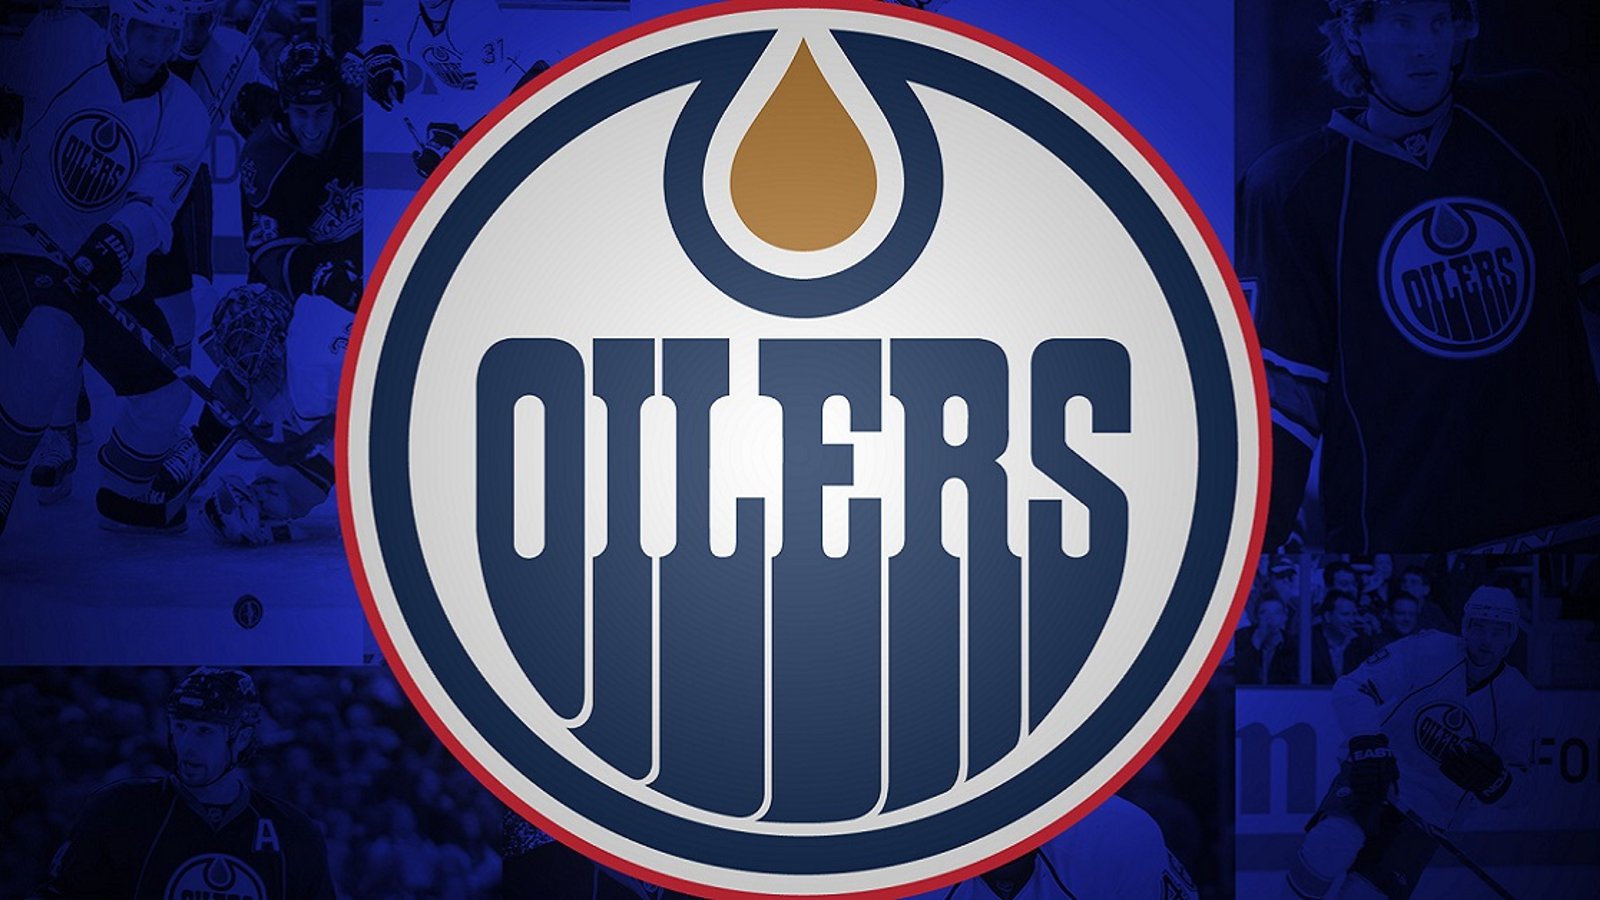 Insider believes the Oilers should make a big move in goal.